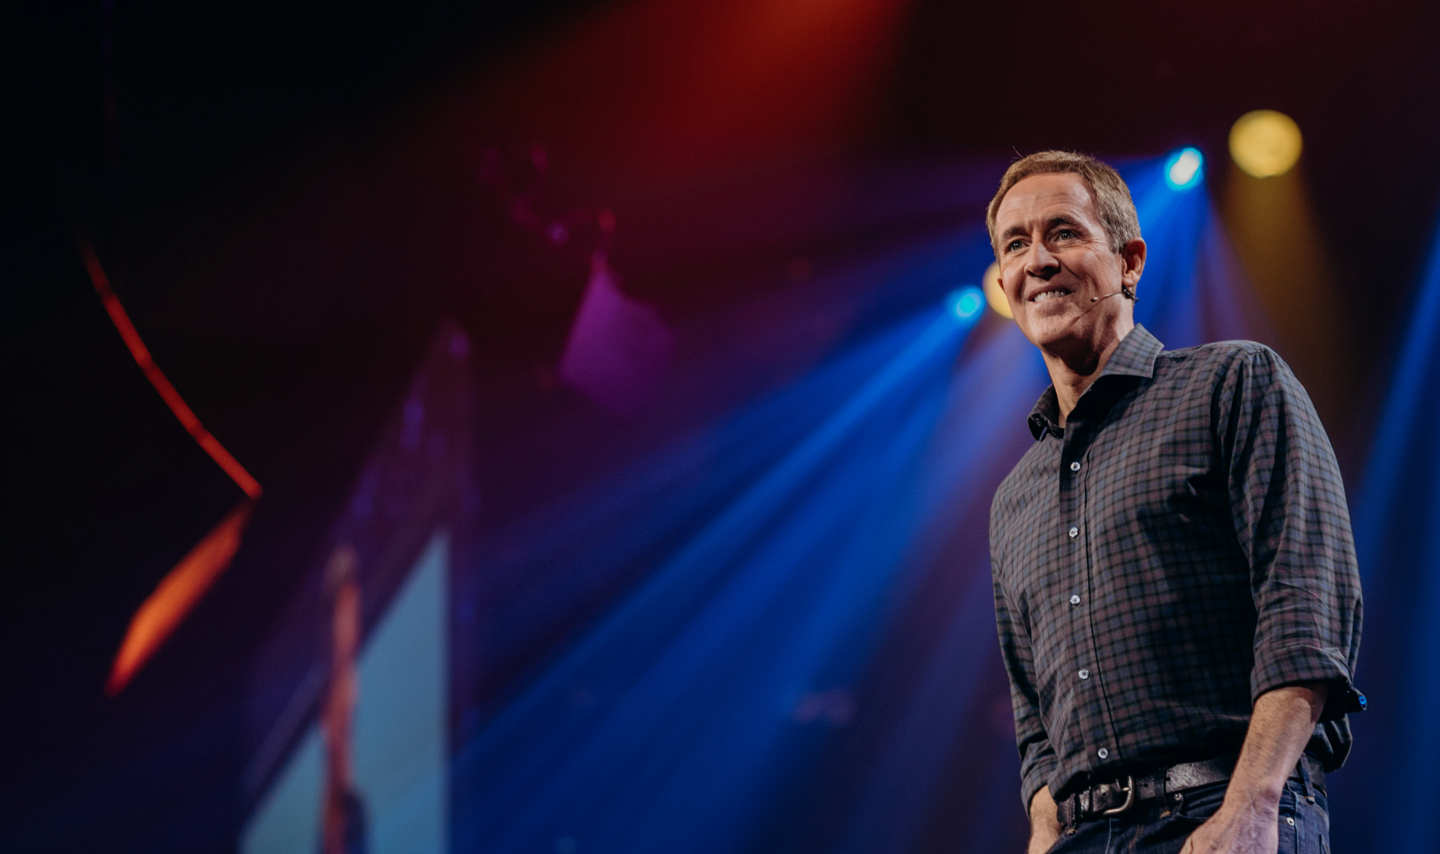 andy stanley podcast your move